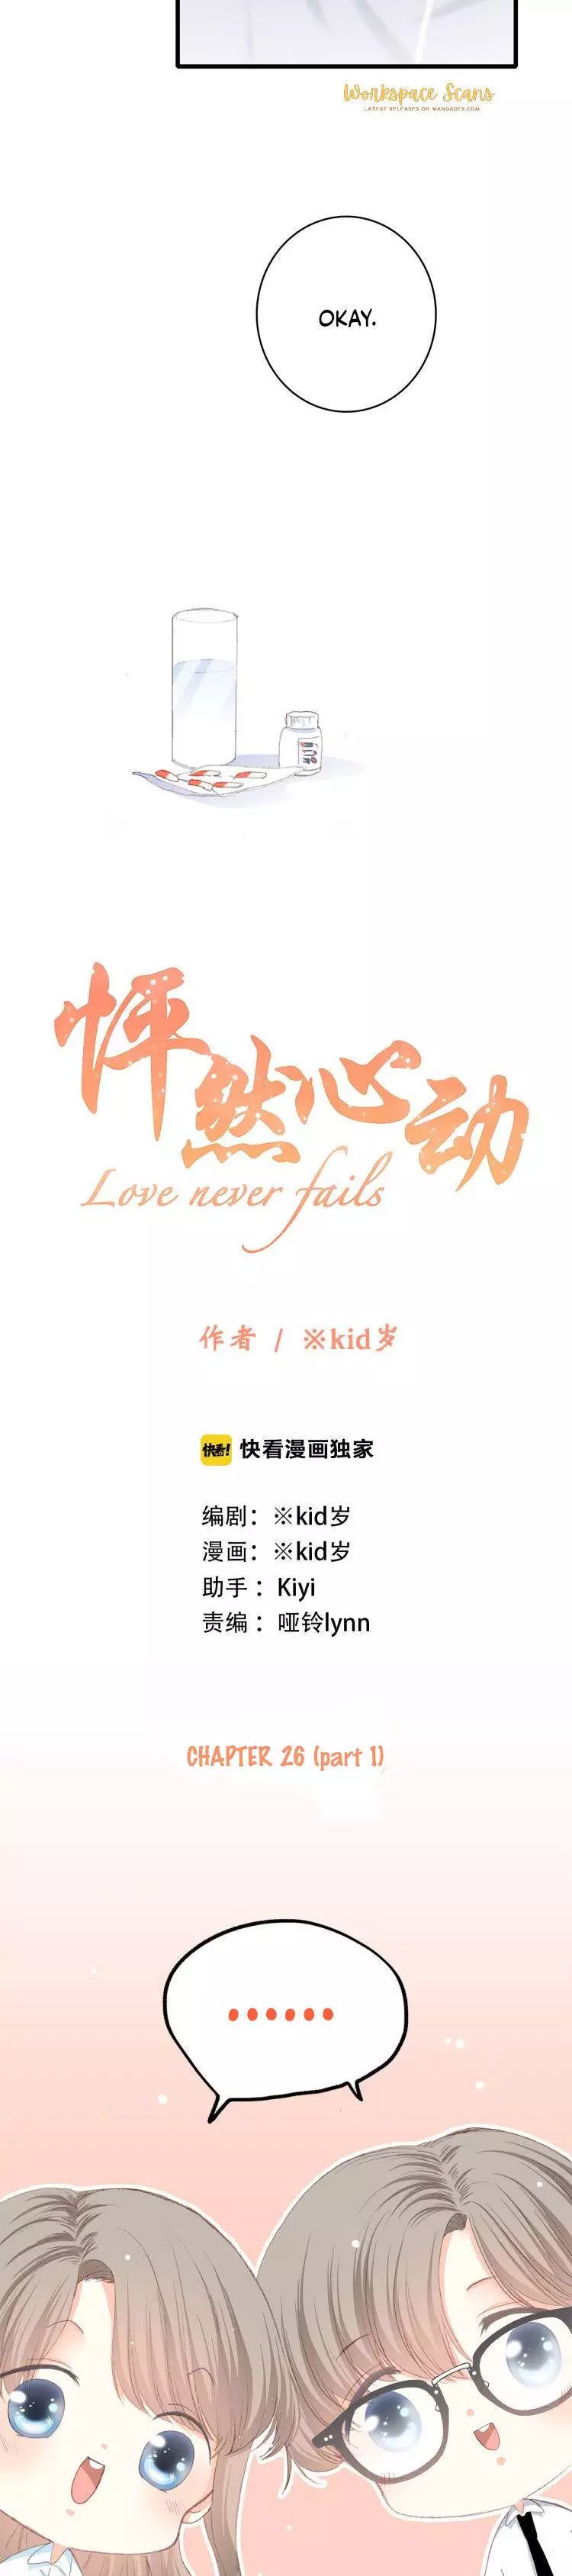 Love Never Fails - 26.1 page 3